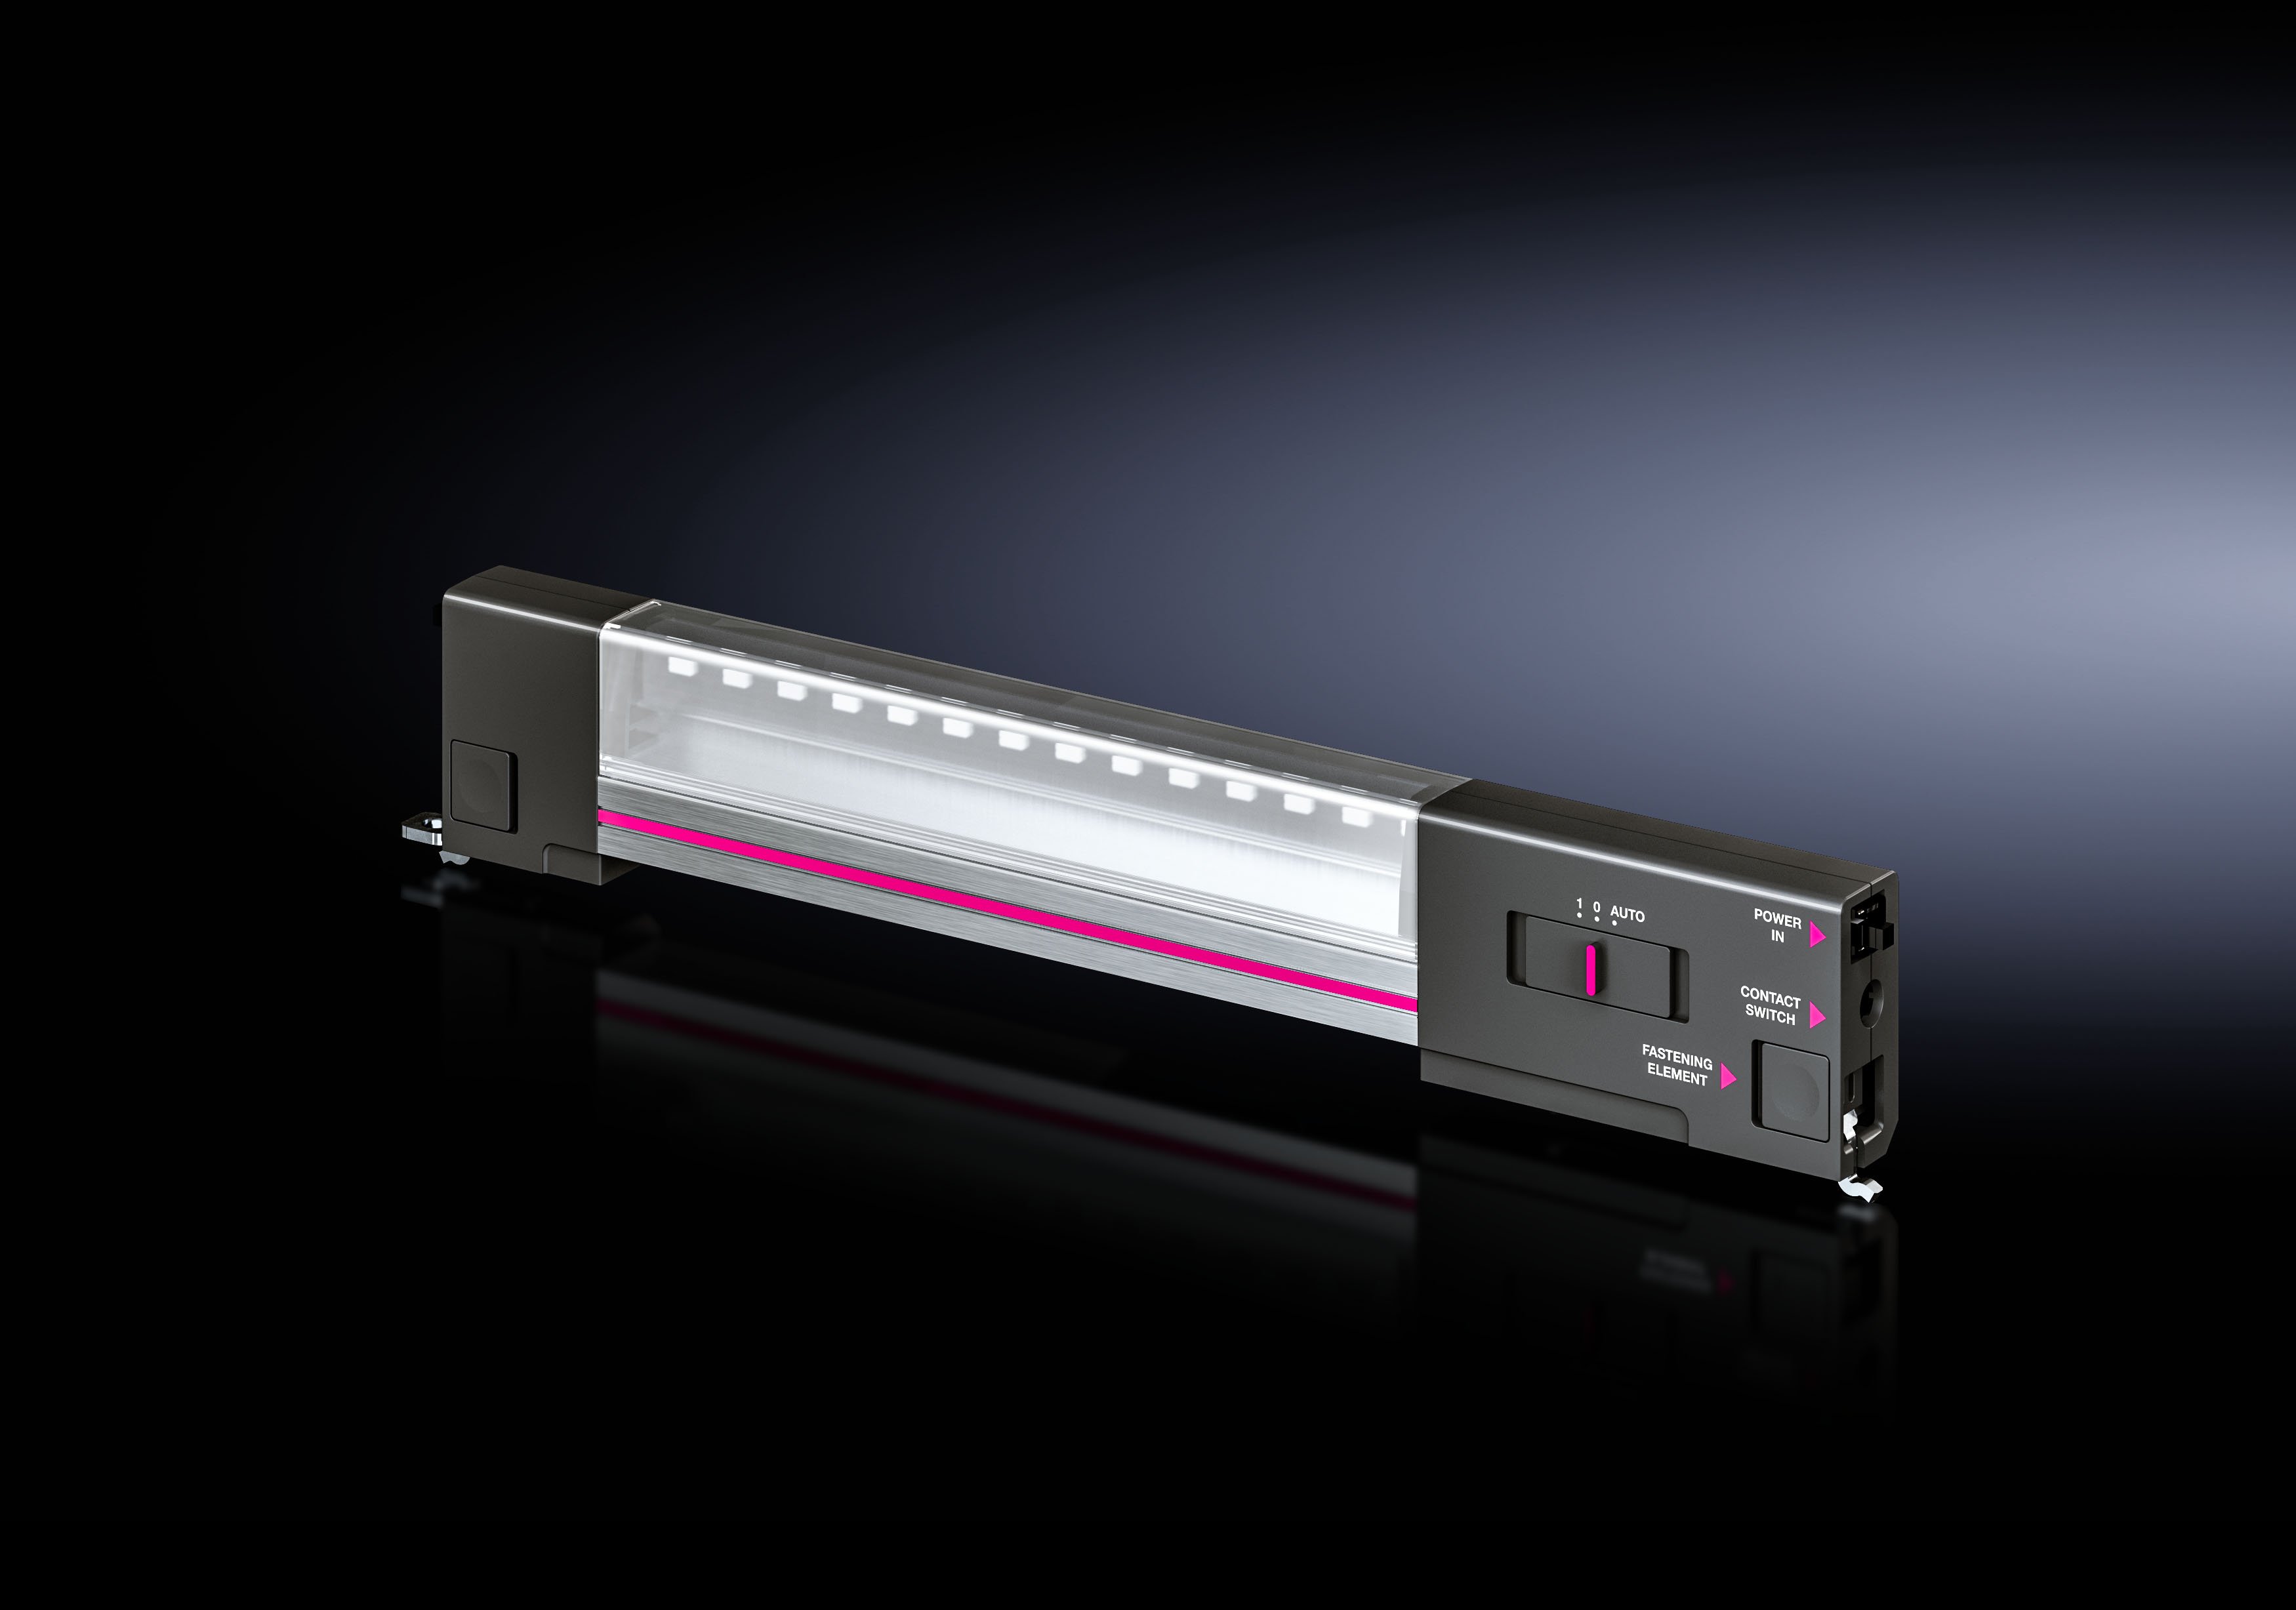 Rittal Launches Led Light For Racks And